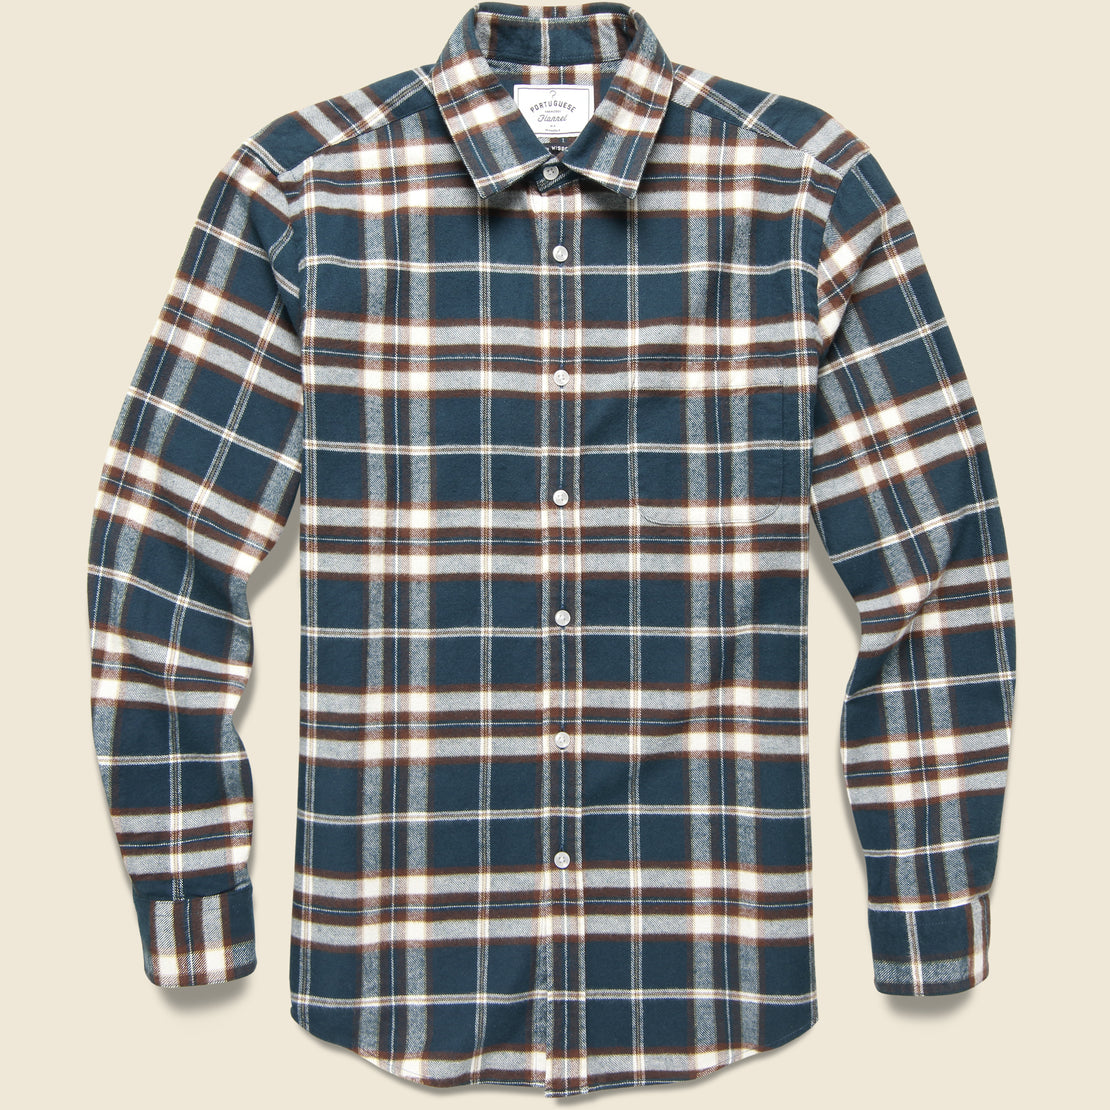 Portuguese Flannel Smooth Check Shirt - Blue/Brown